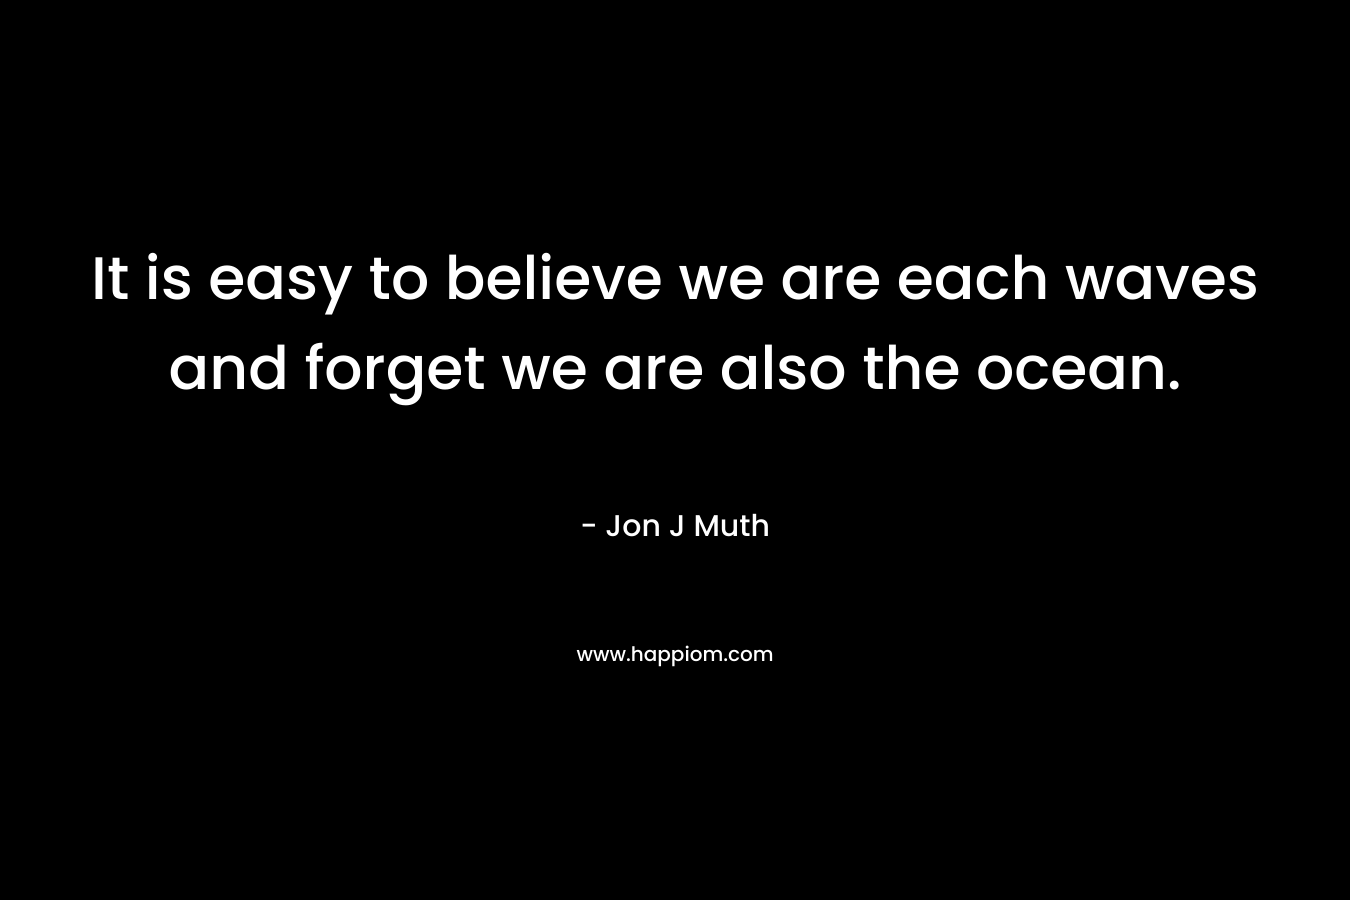 It is easy to believe we are each waves and forget we are also the ocean. – Jon J Muth